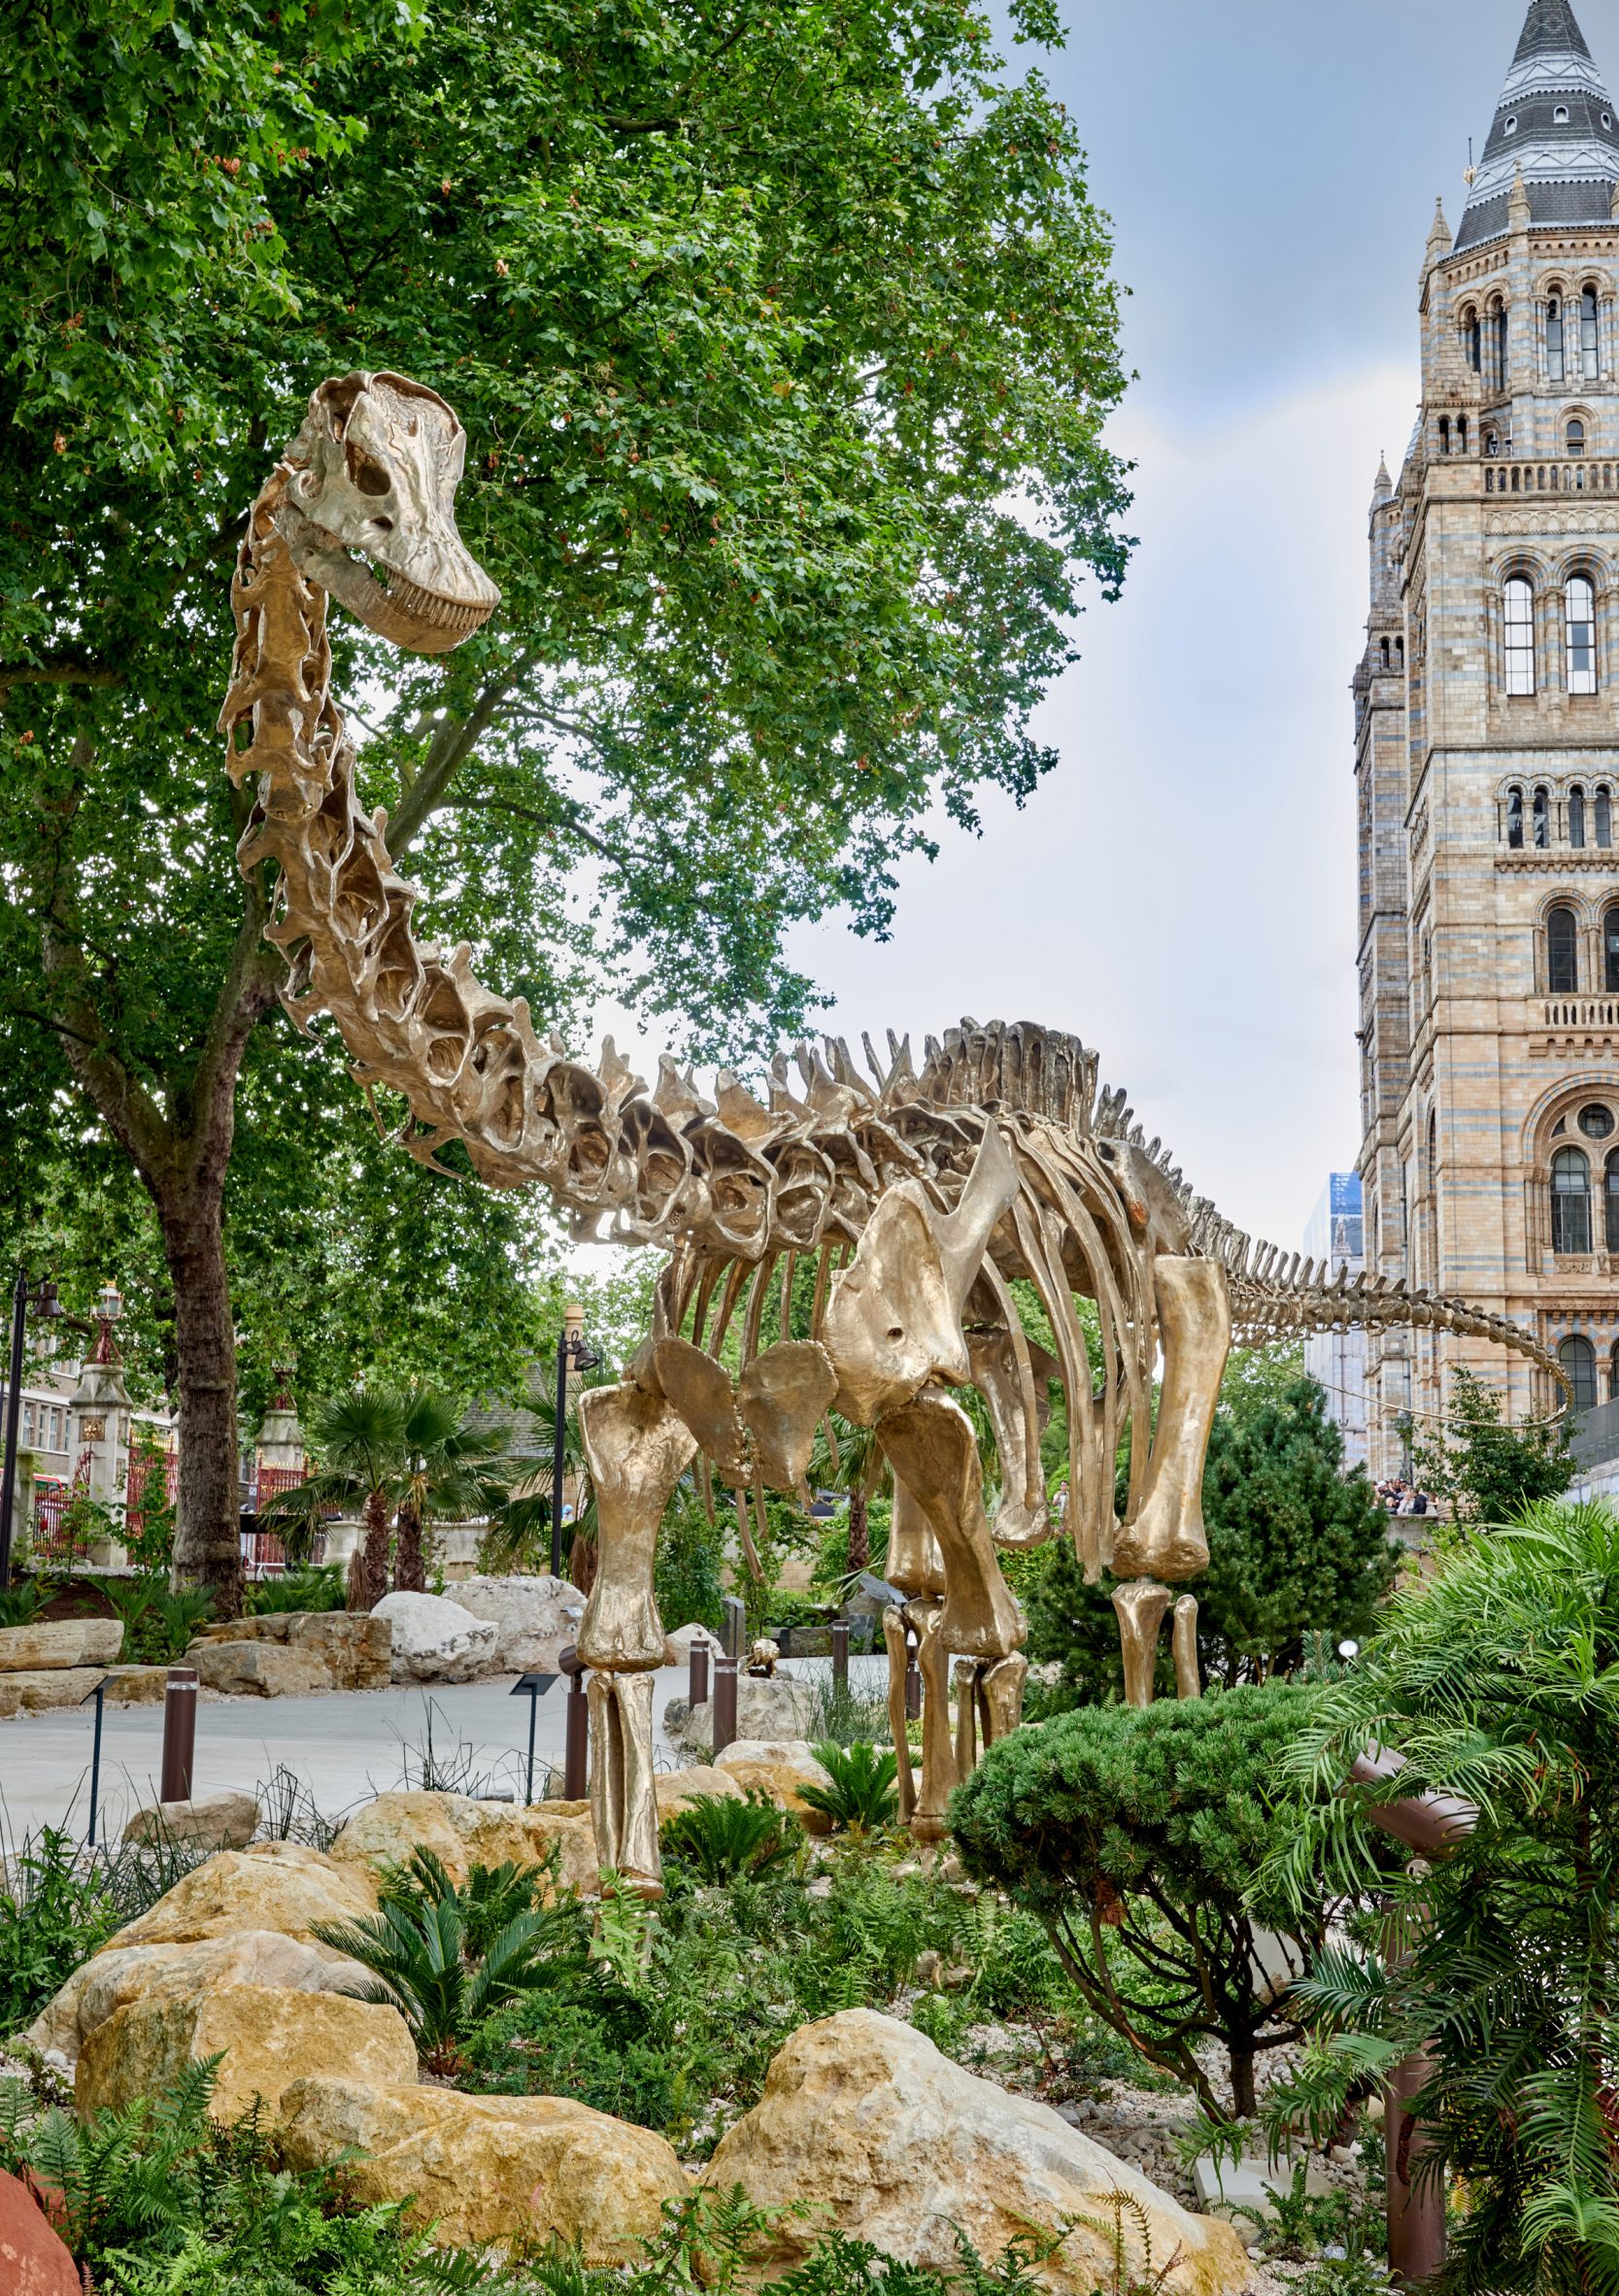 Fern the dinosaur in the Natural History Museum gardens by Feilden Fowles and J&L GIbbons